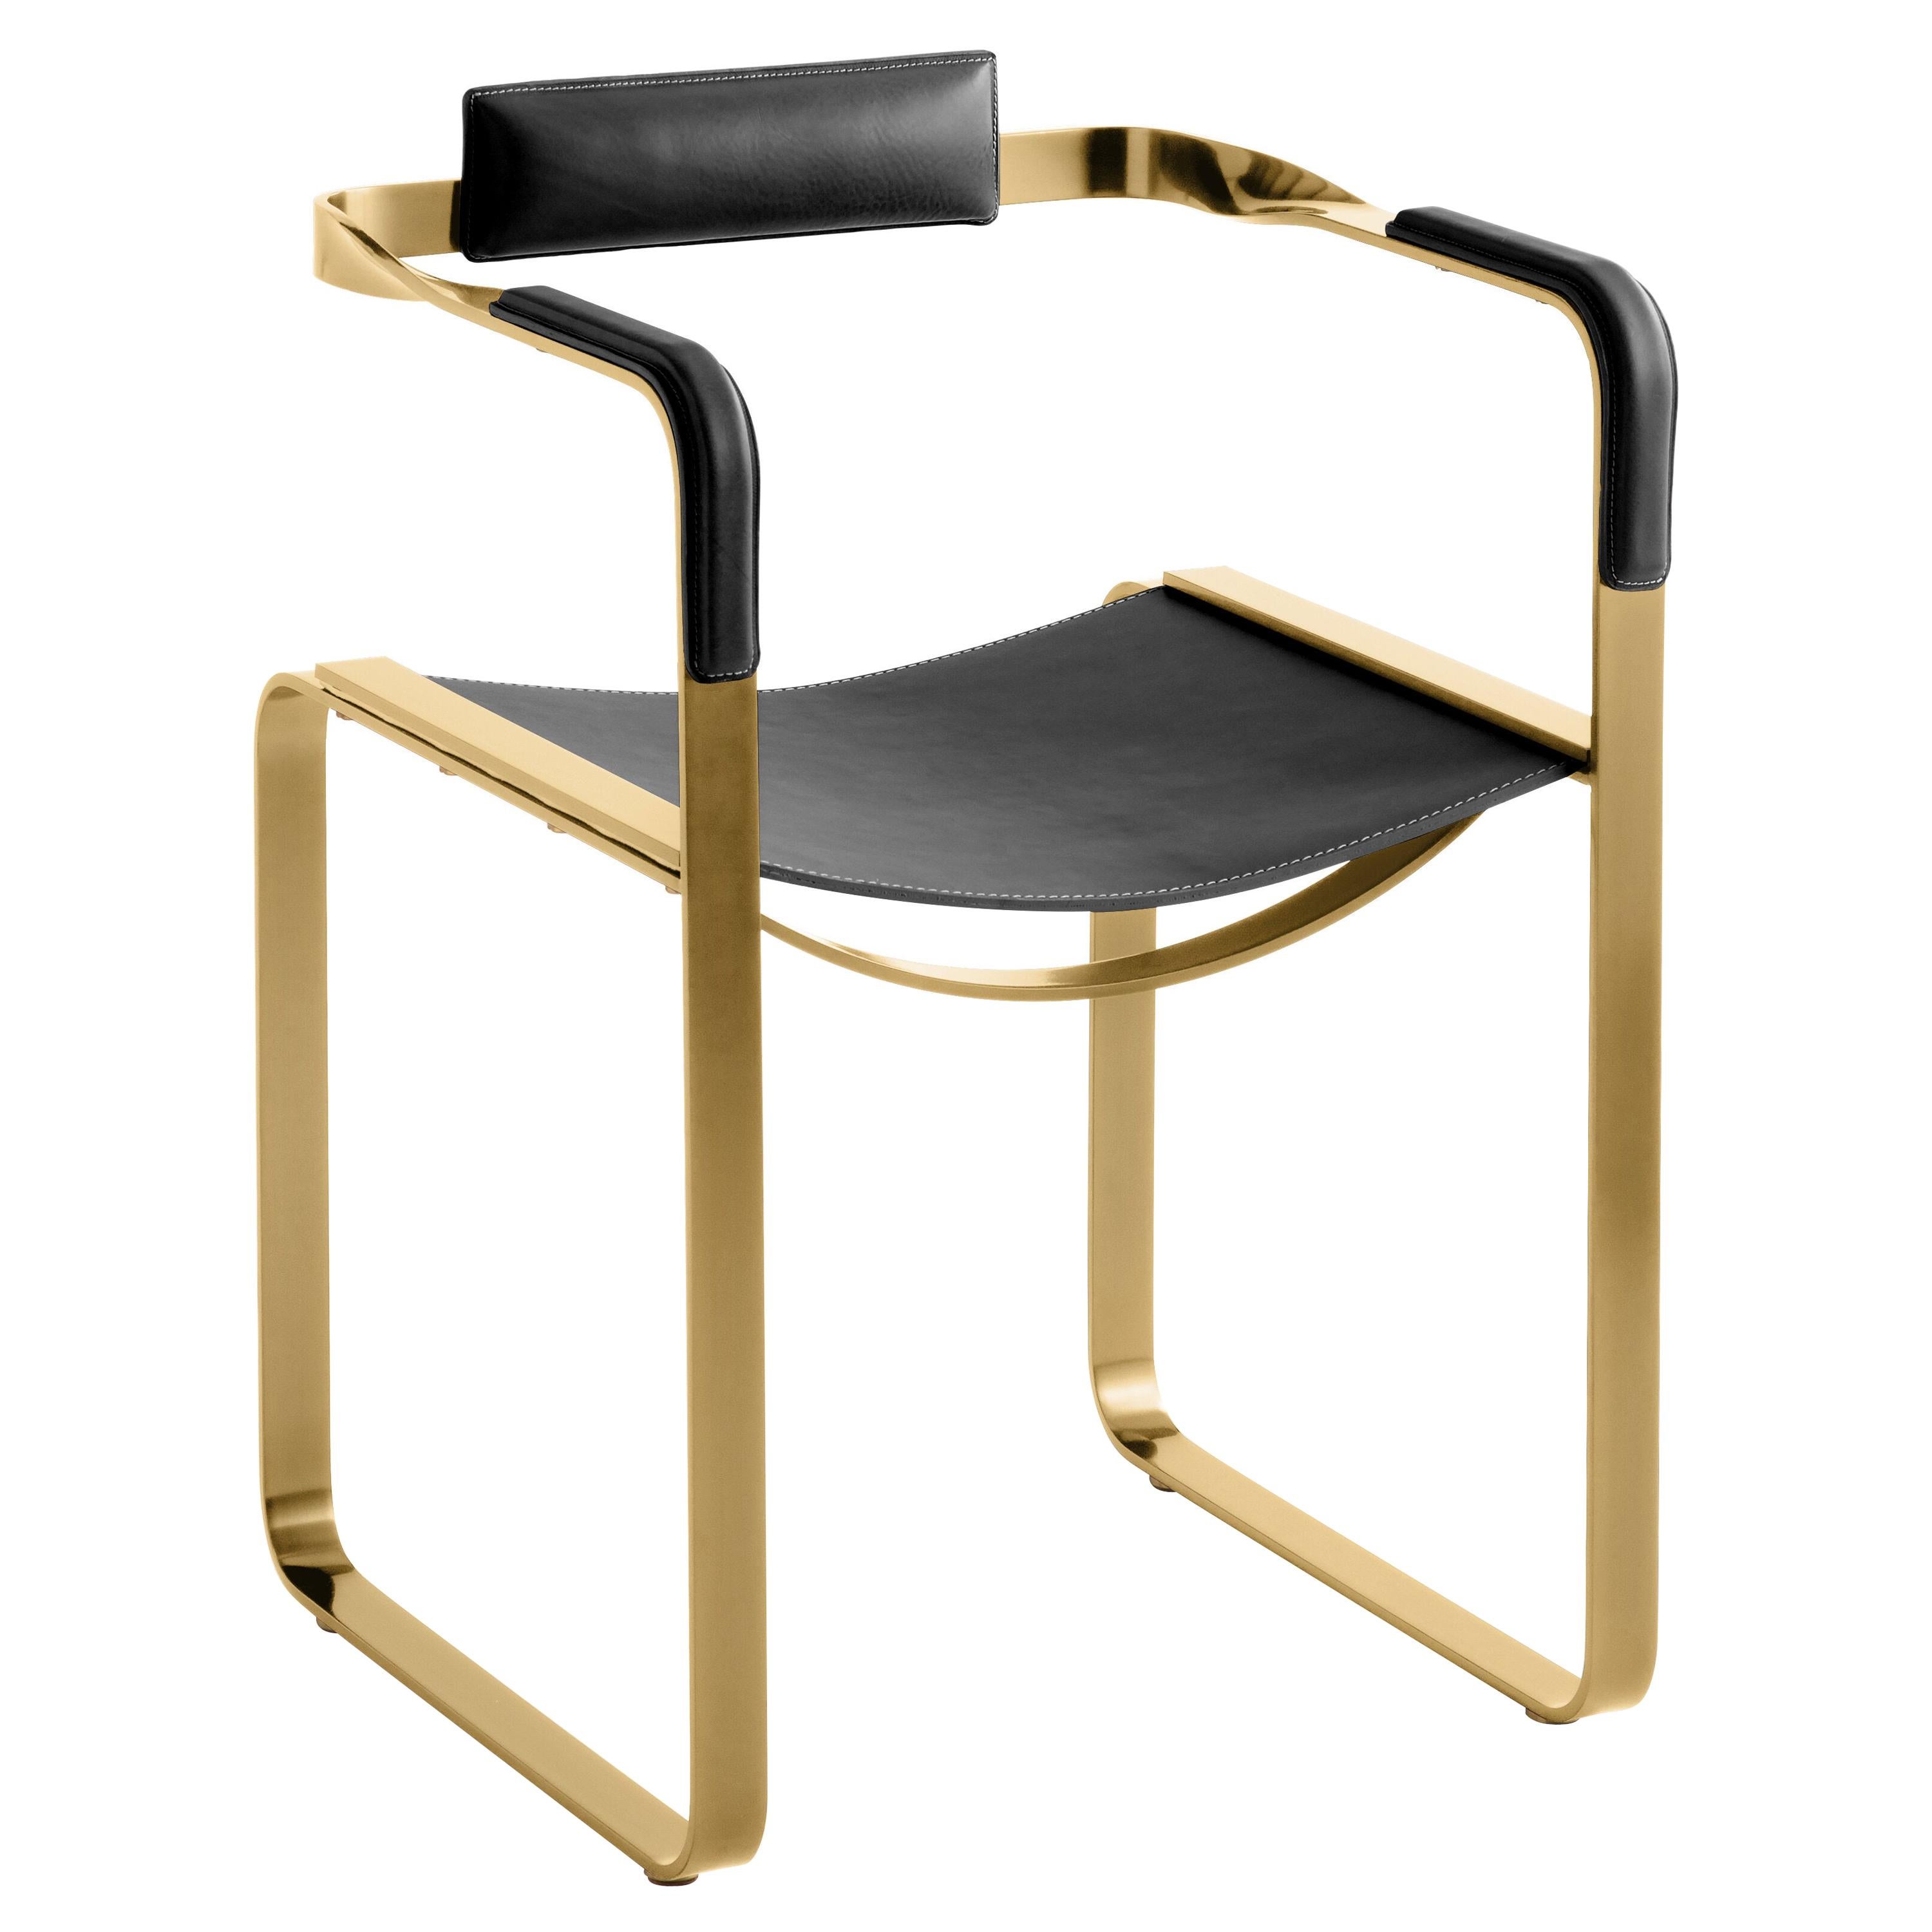 Armchair, Aged Brass Steel and Black Saddle Leather, Contemporary Style